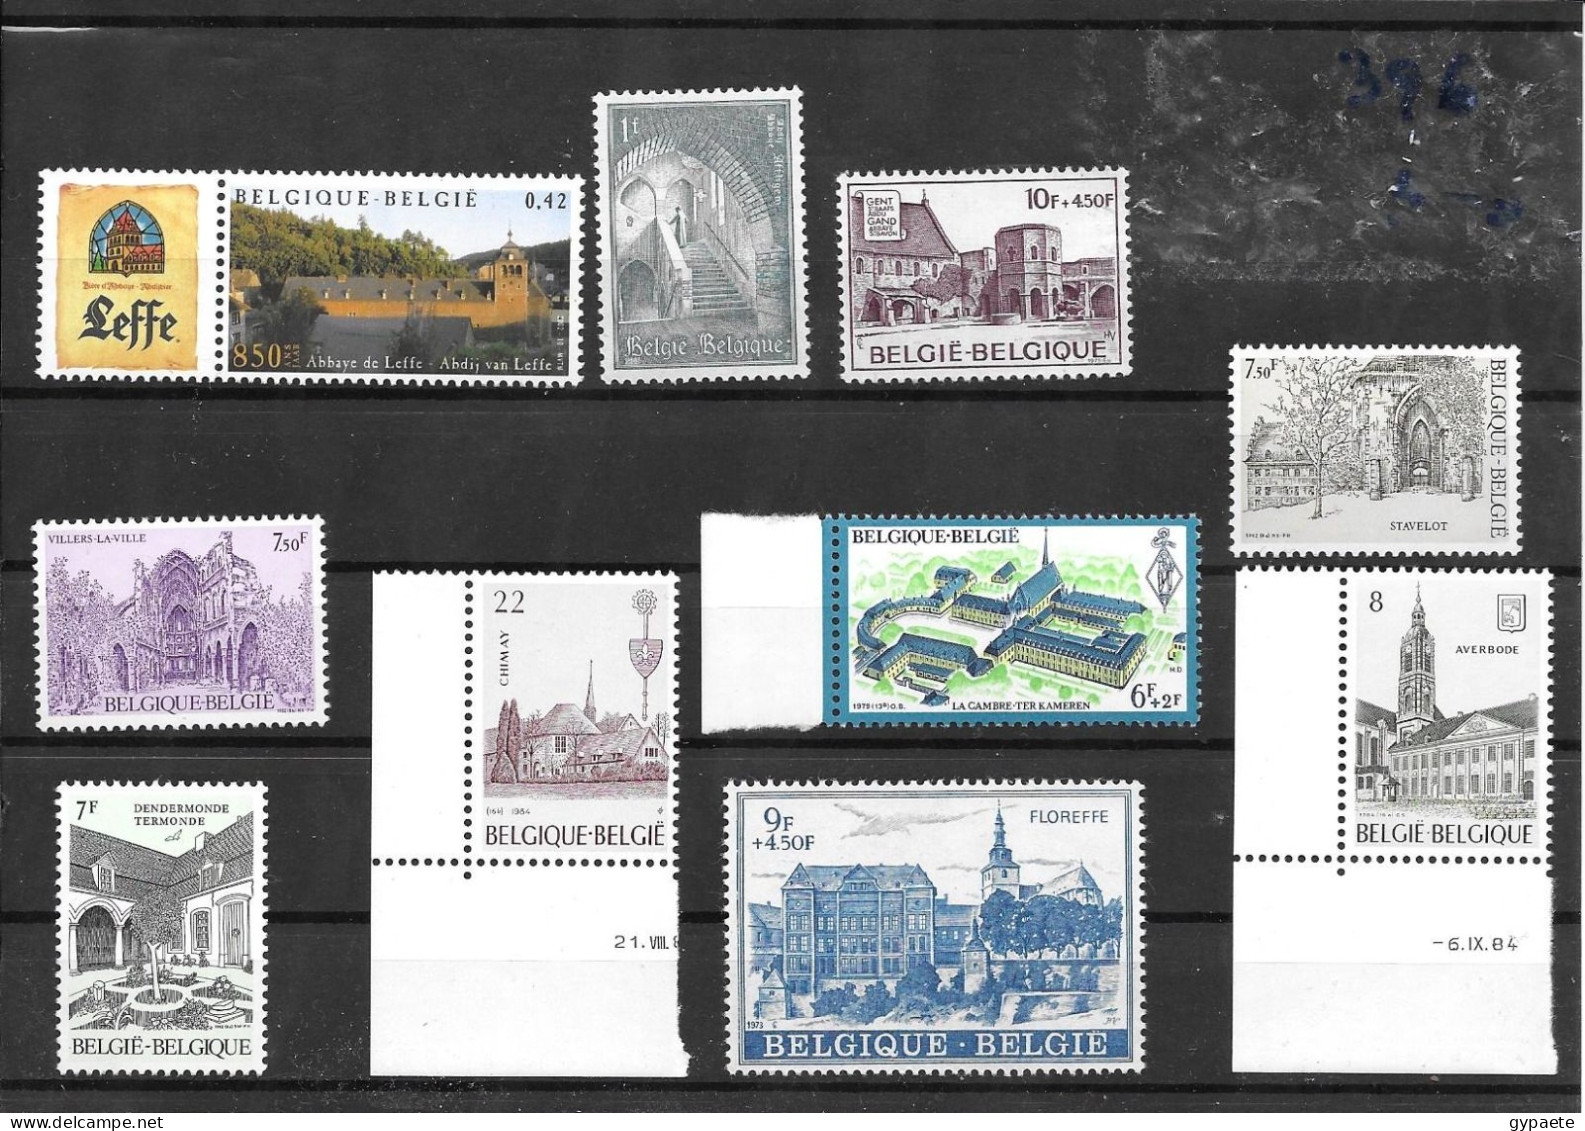 Abbayes Et Monastères - 36 Timbres / Abbeys And Monasteries - 36 Stamps - MNH - Abbazie E Monasteri